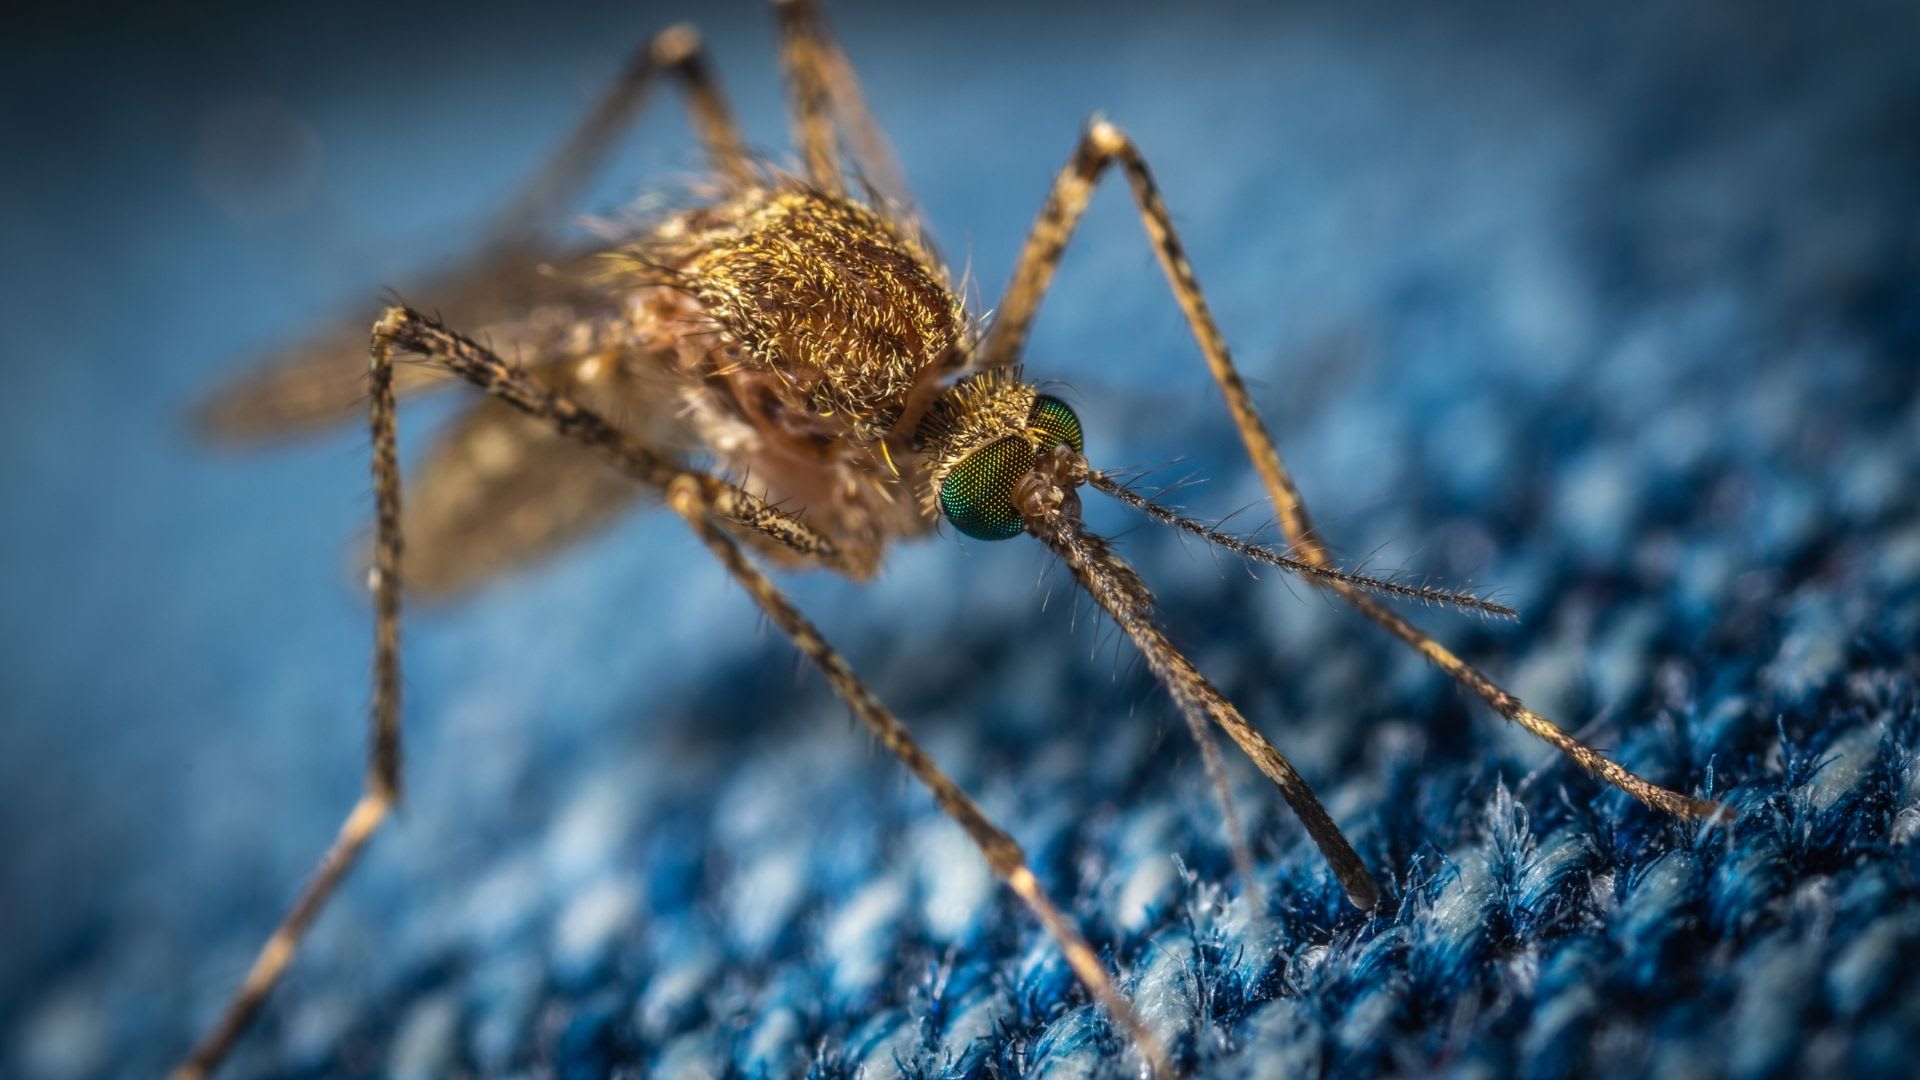 Mosquitos are not only irritating - but they can also spread dangerous diseases. They should be taken care of immediately with proper insecticides!